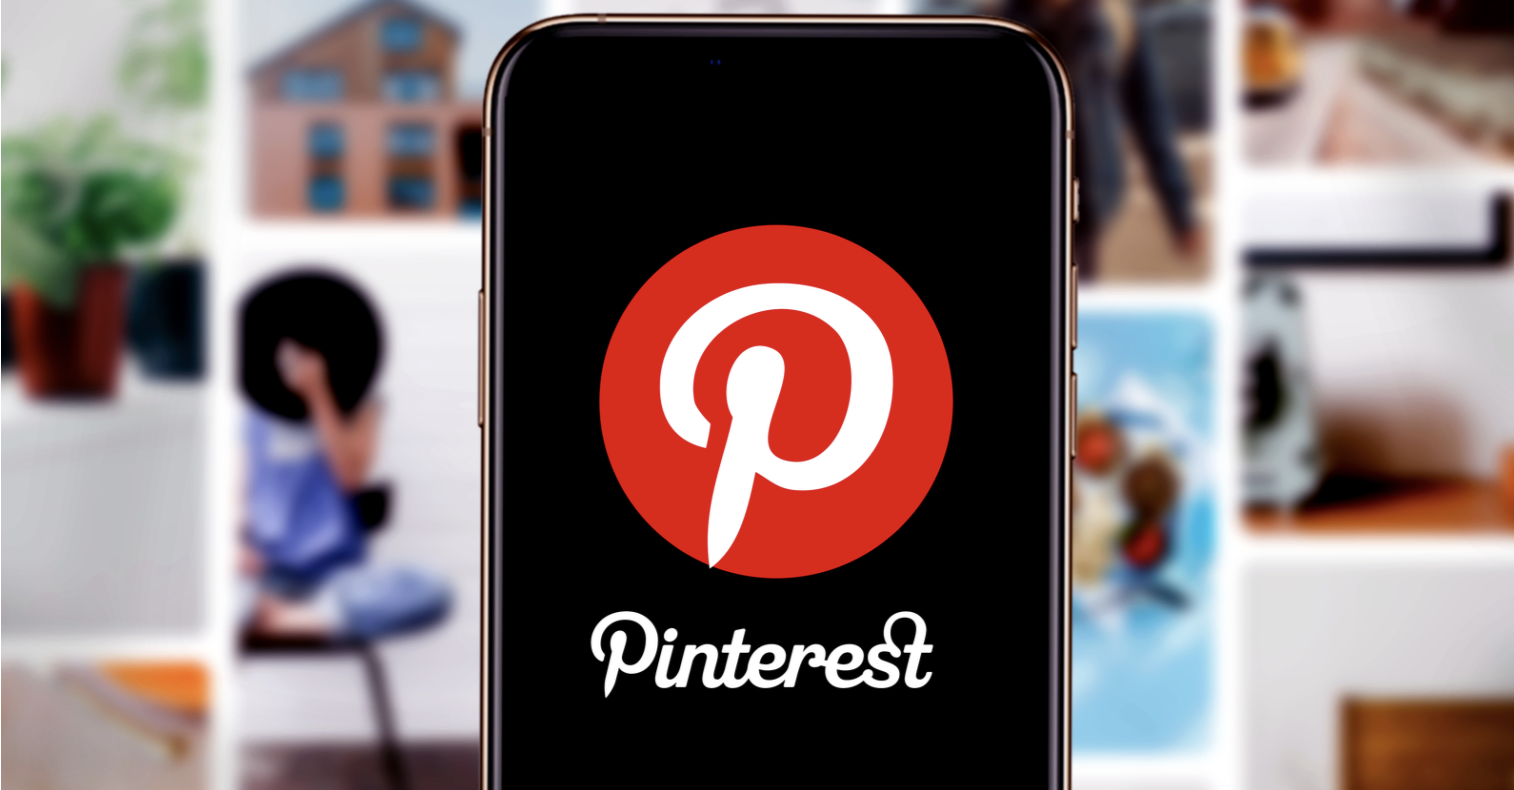 Why choose Pinterest to grow your business? 